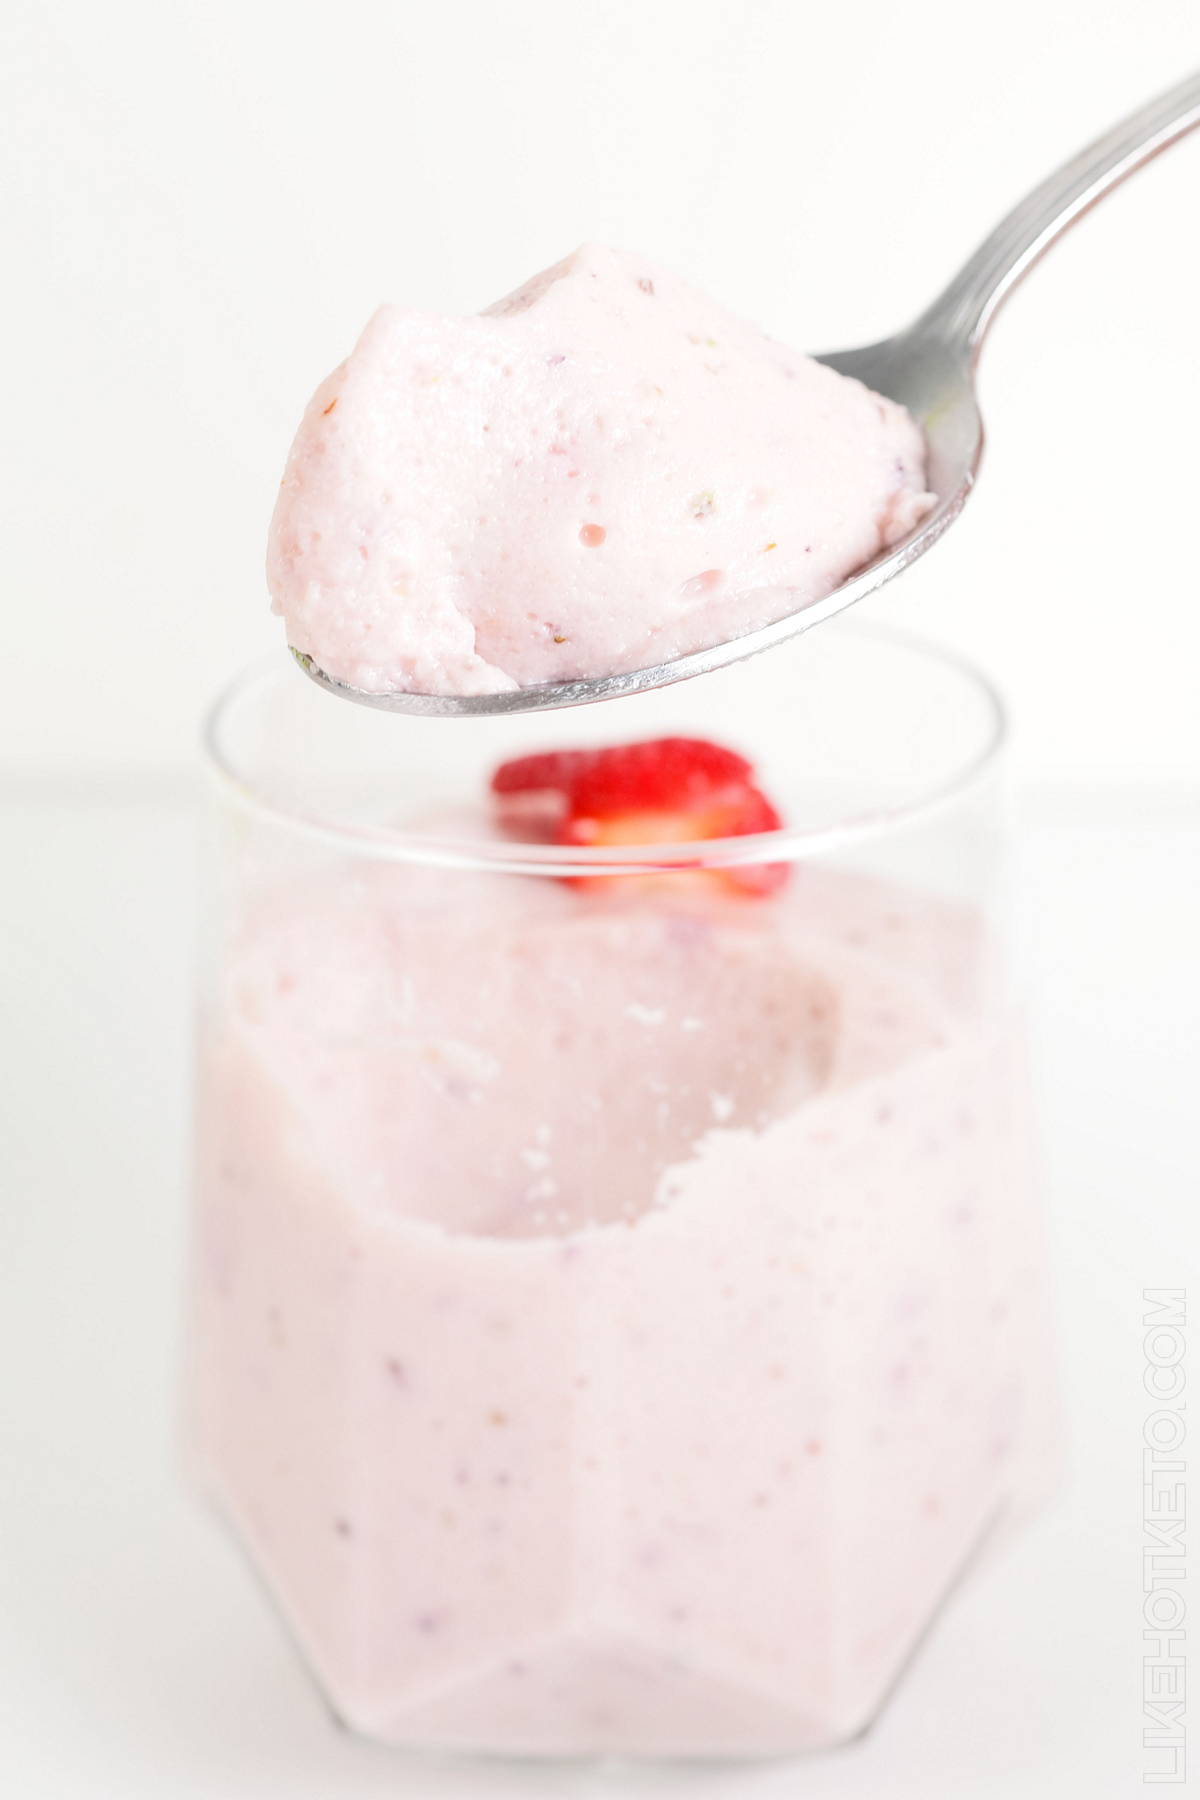 Strawberry yogurt and gelatin fluff on a spoon, with soft mousse texture.